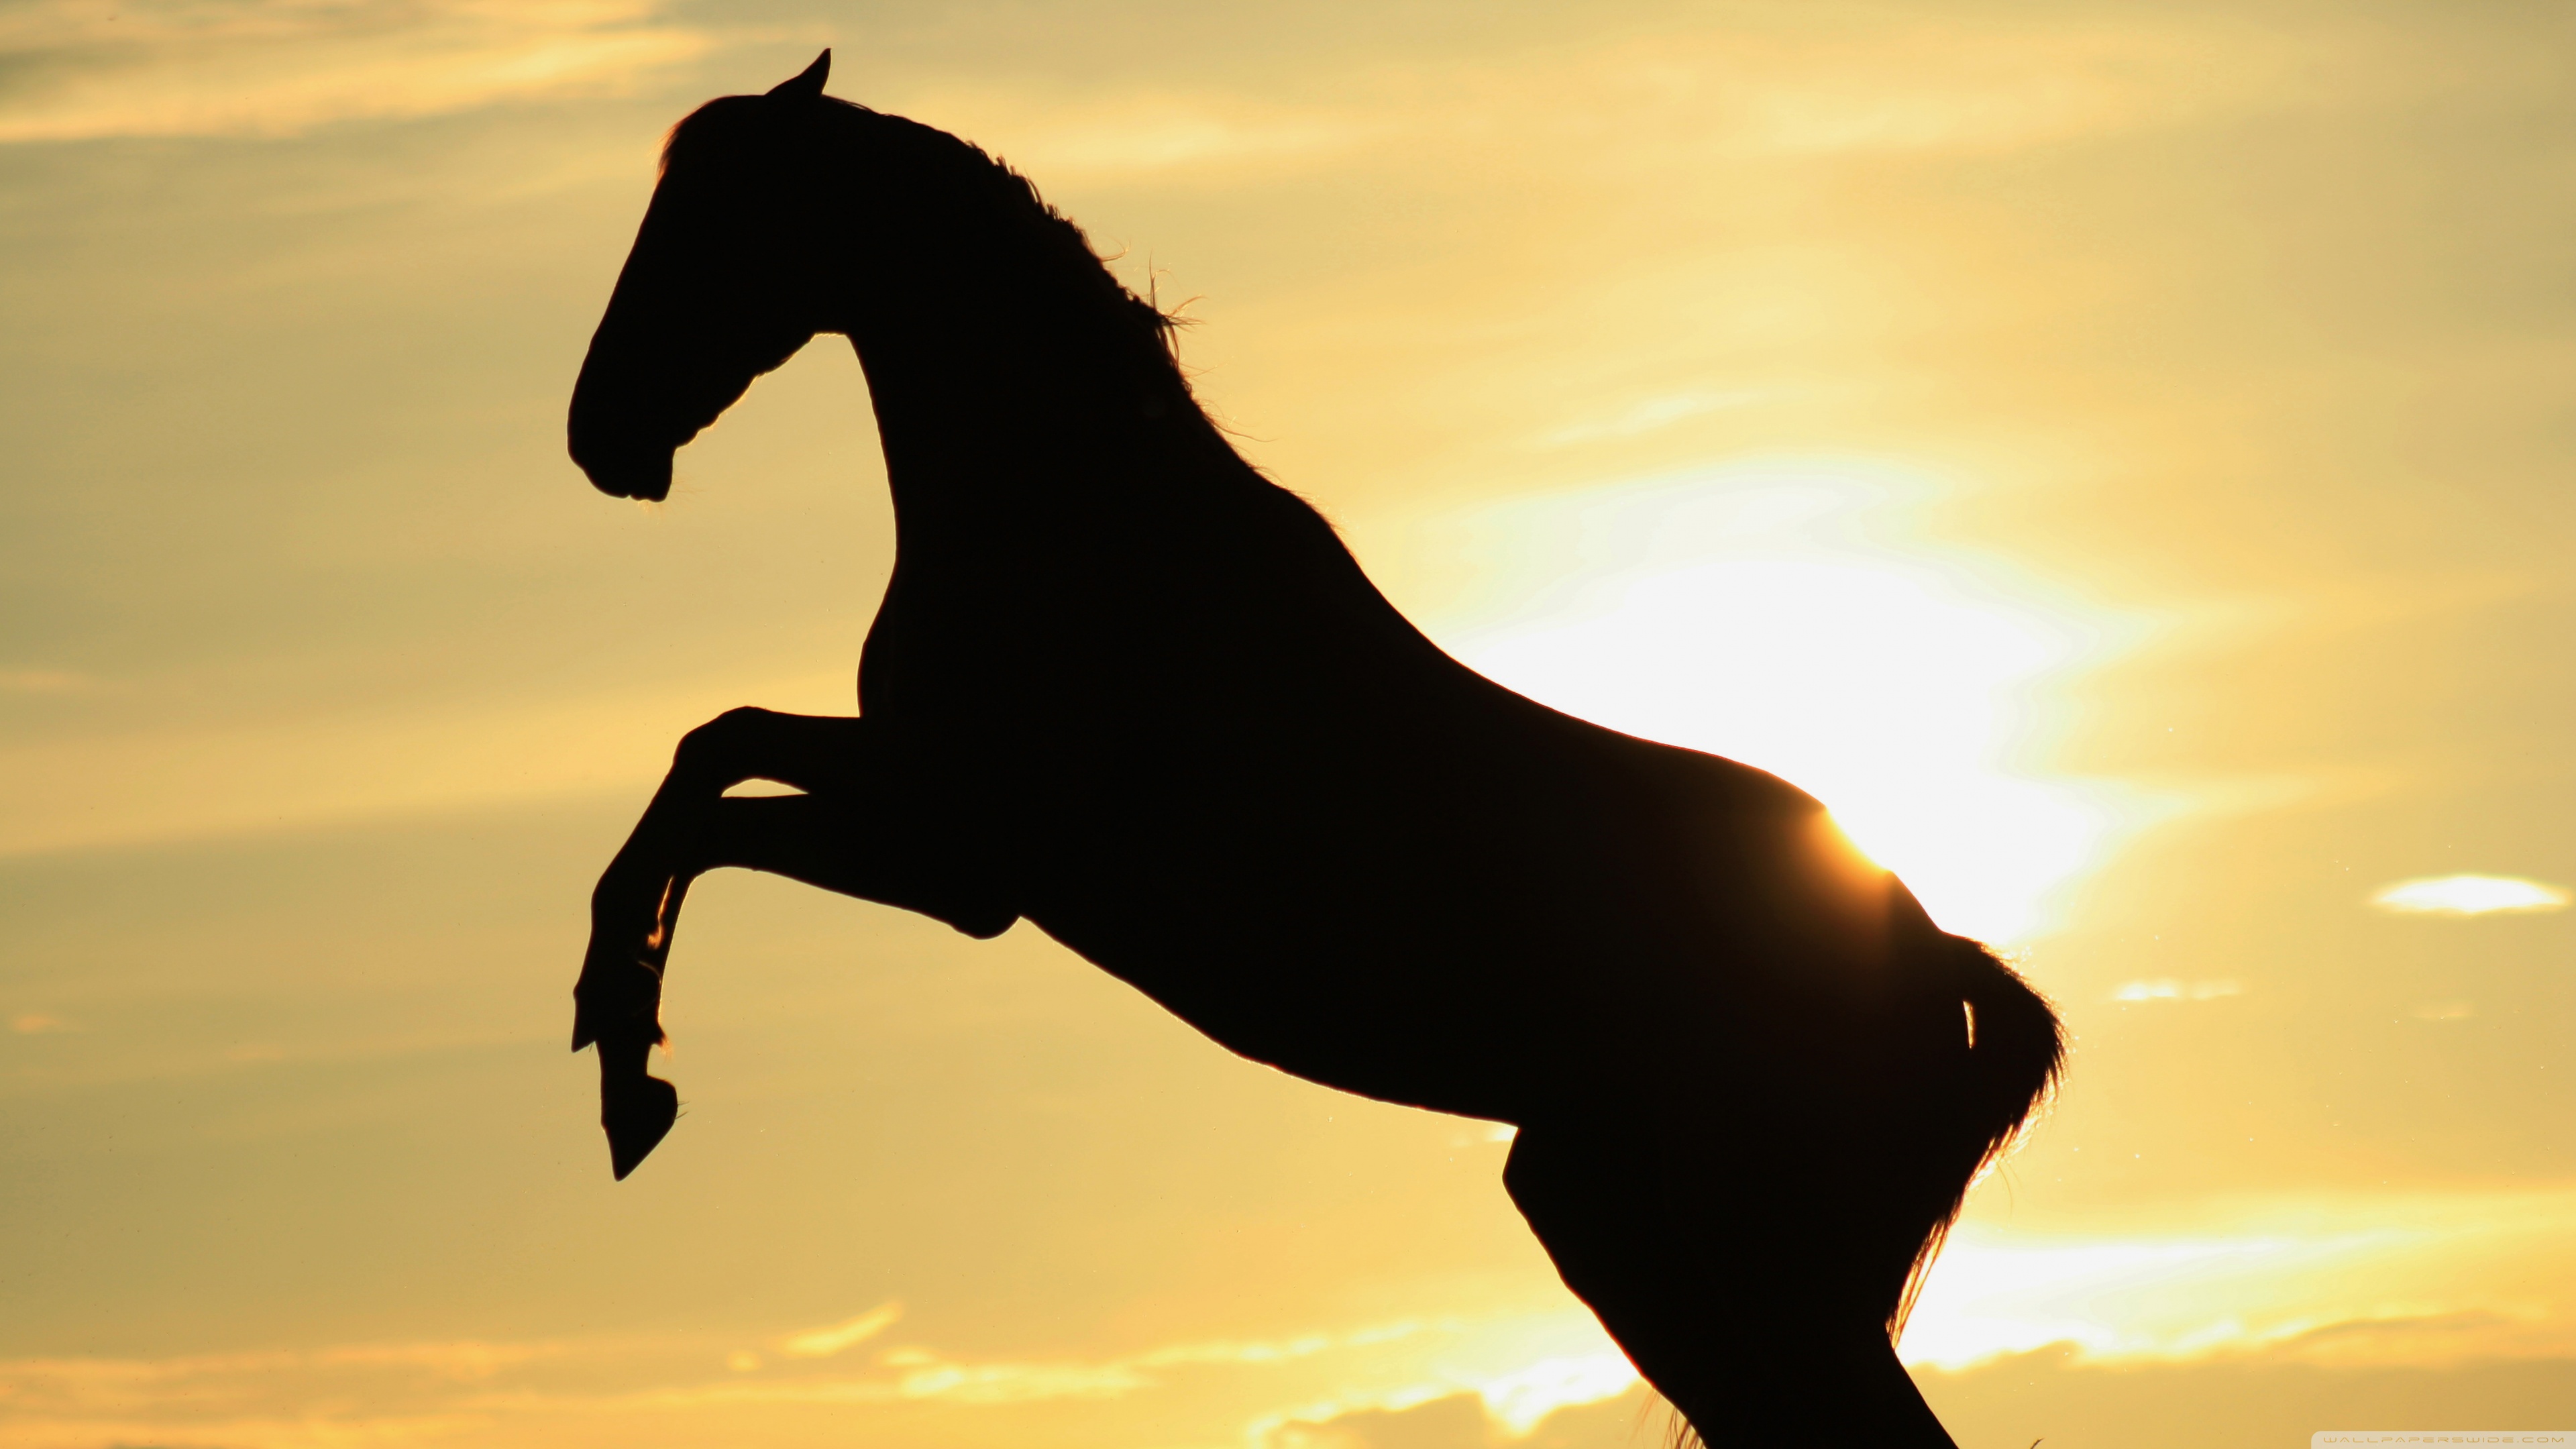 Horse and Rider Silhouette on the Beach Live Wallpaper